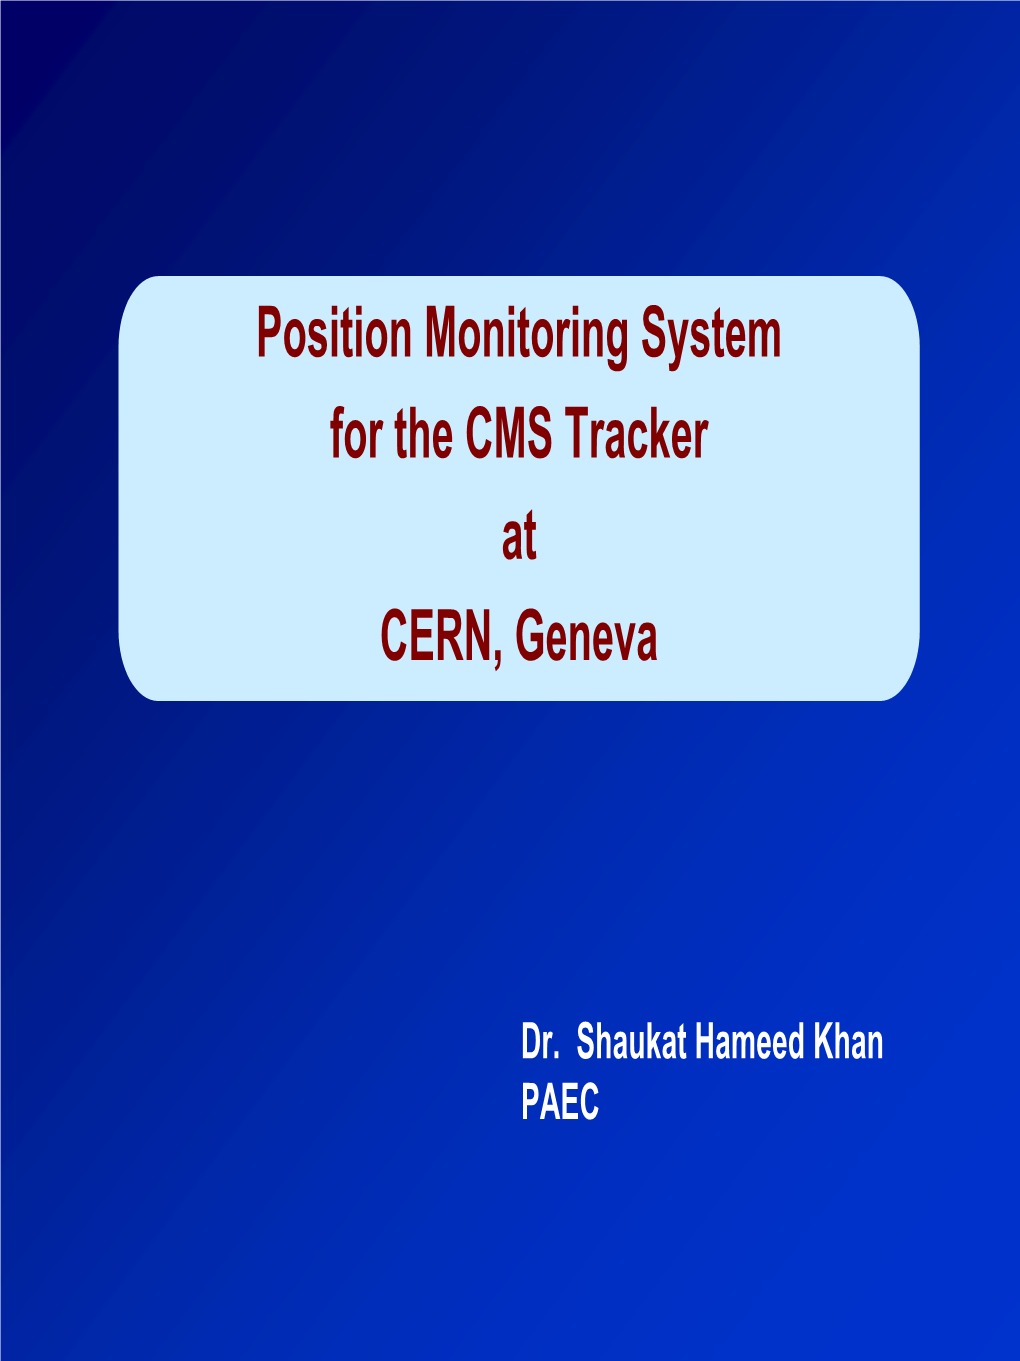 Position Monitoring System for the CMS Tracker at CERN, Geneva